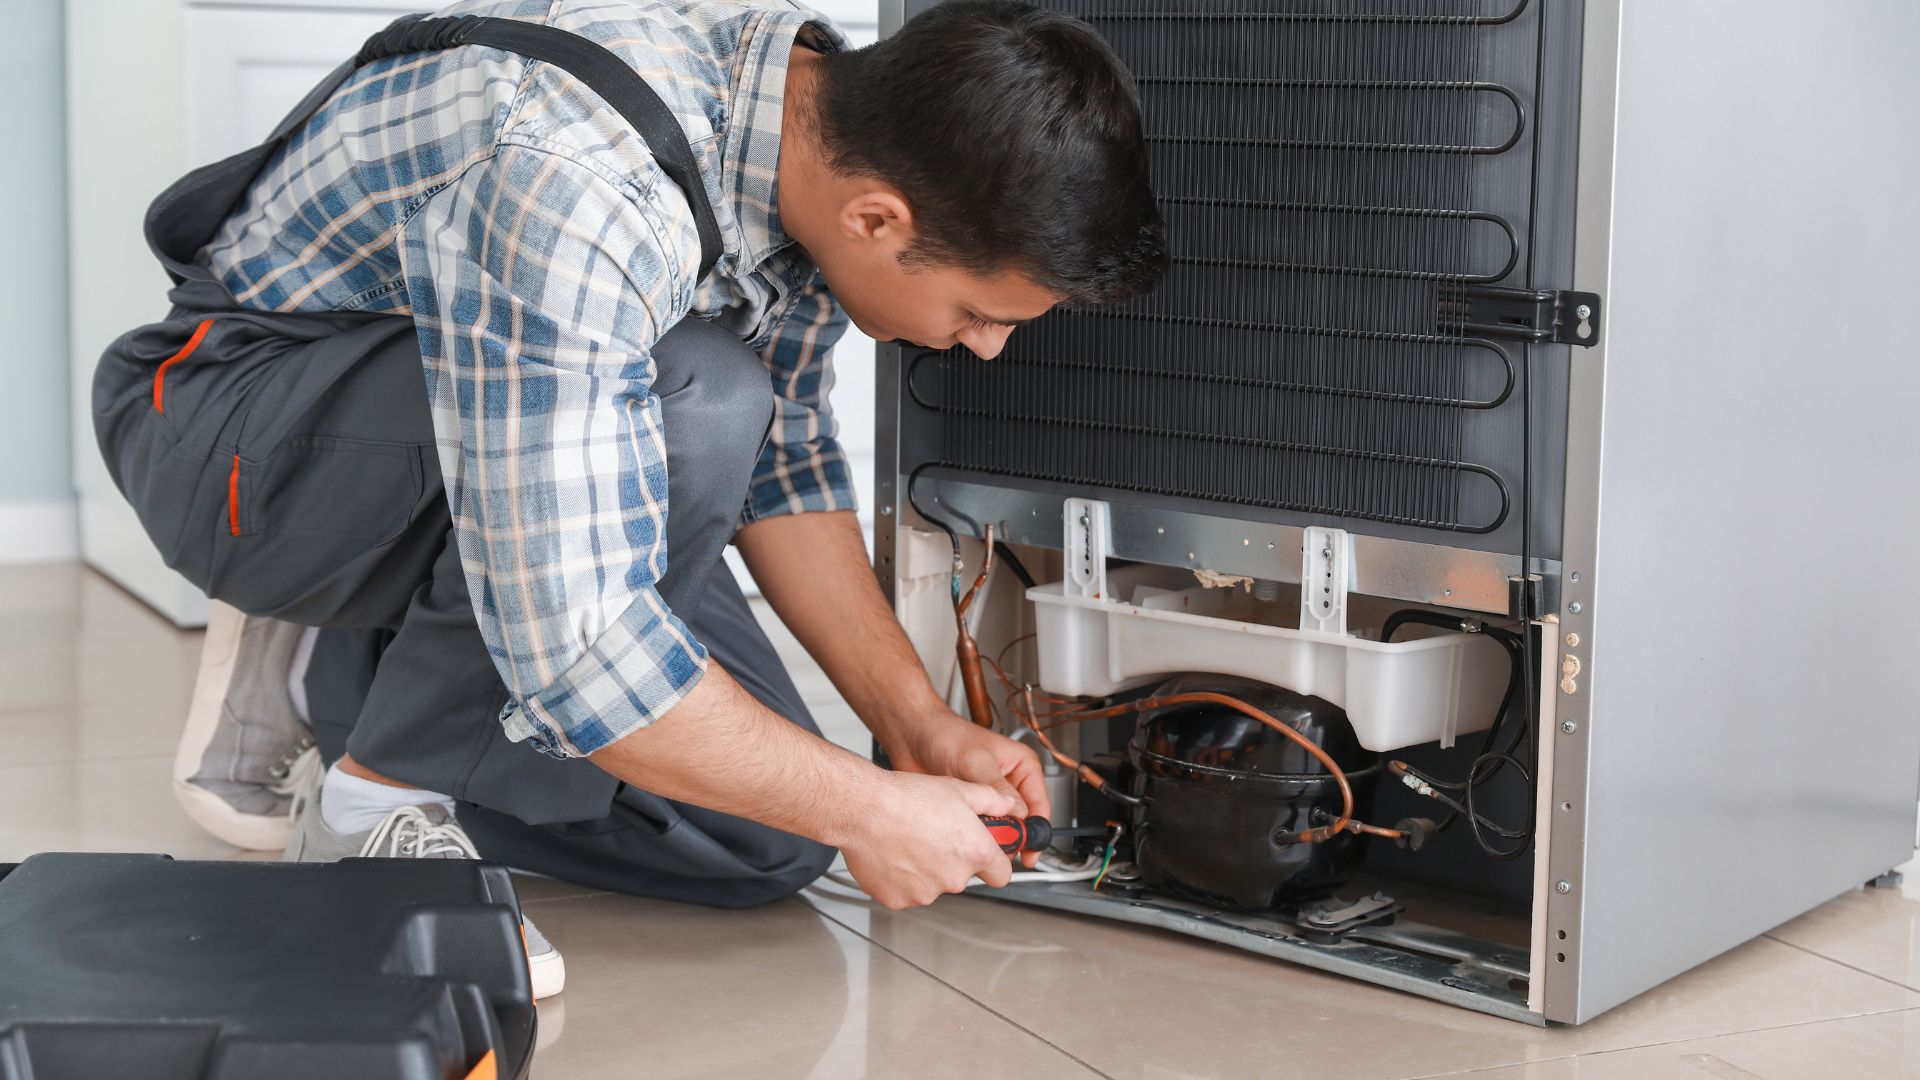 Fixing fridge with genuine kitchen appliance spare parts